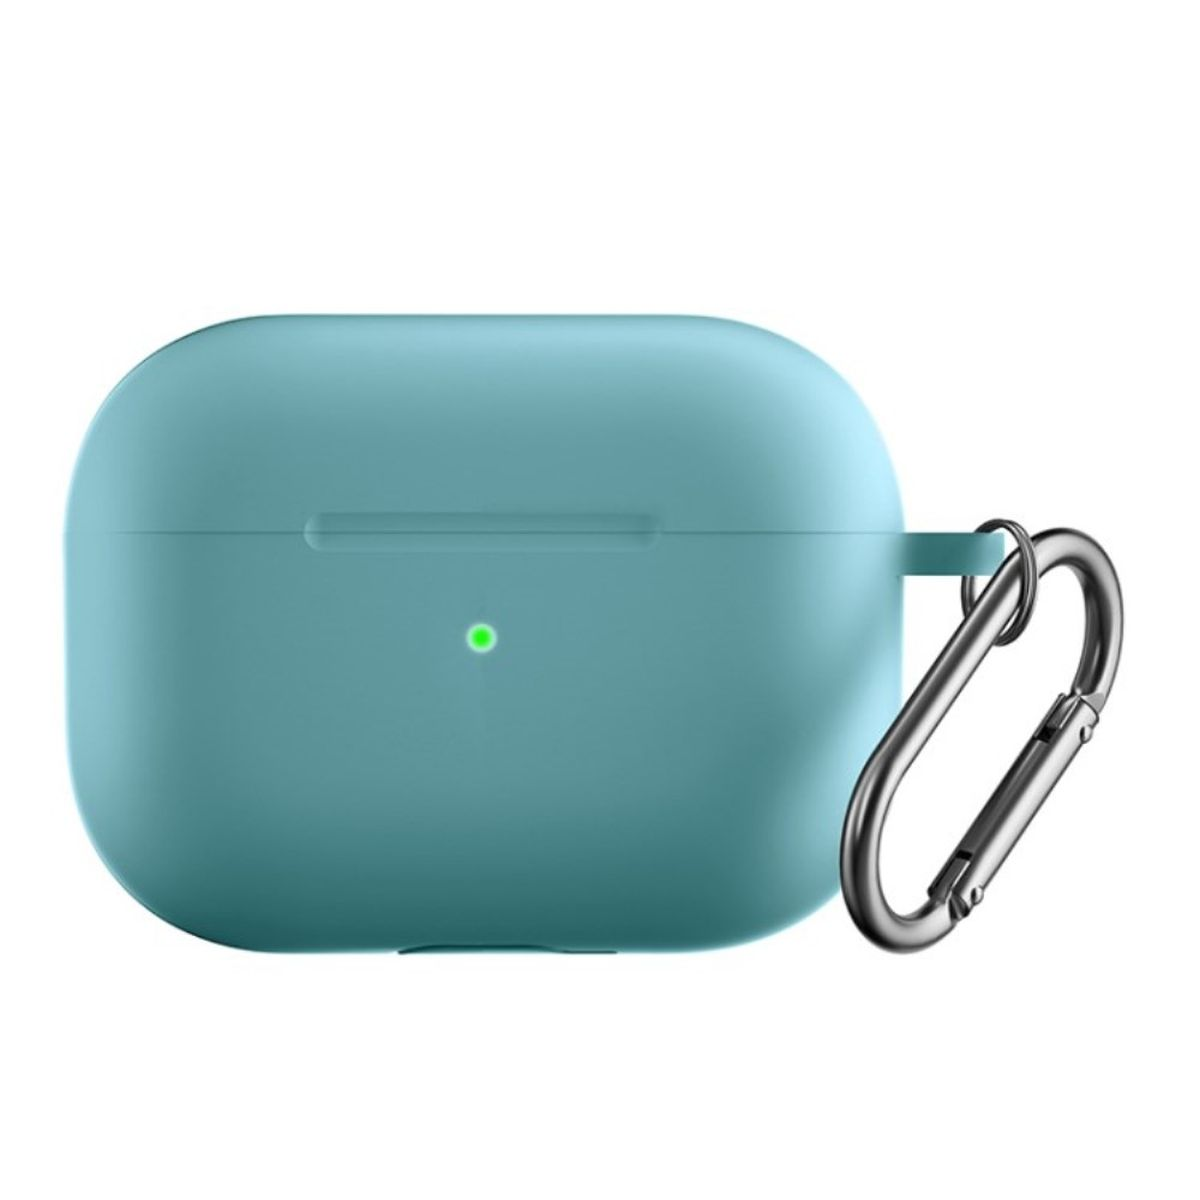 Apple COVERKINGZ für Ladecase 77380 Airpods Silikoncover Unisex, Pro mint, 2